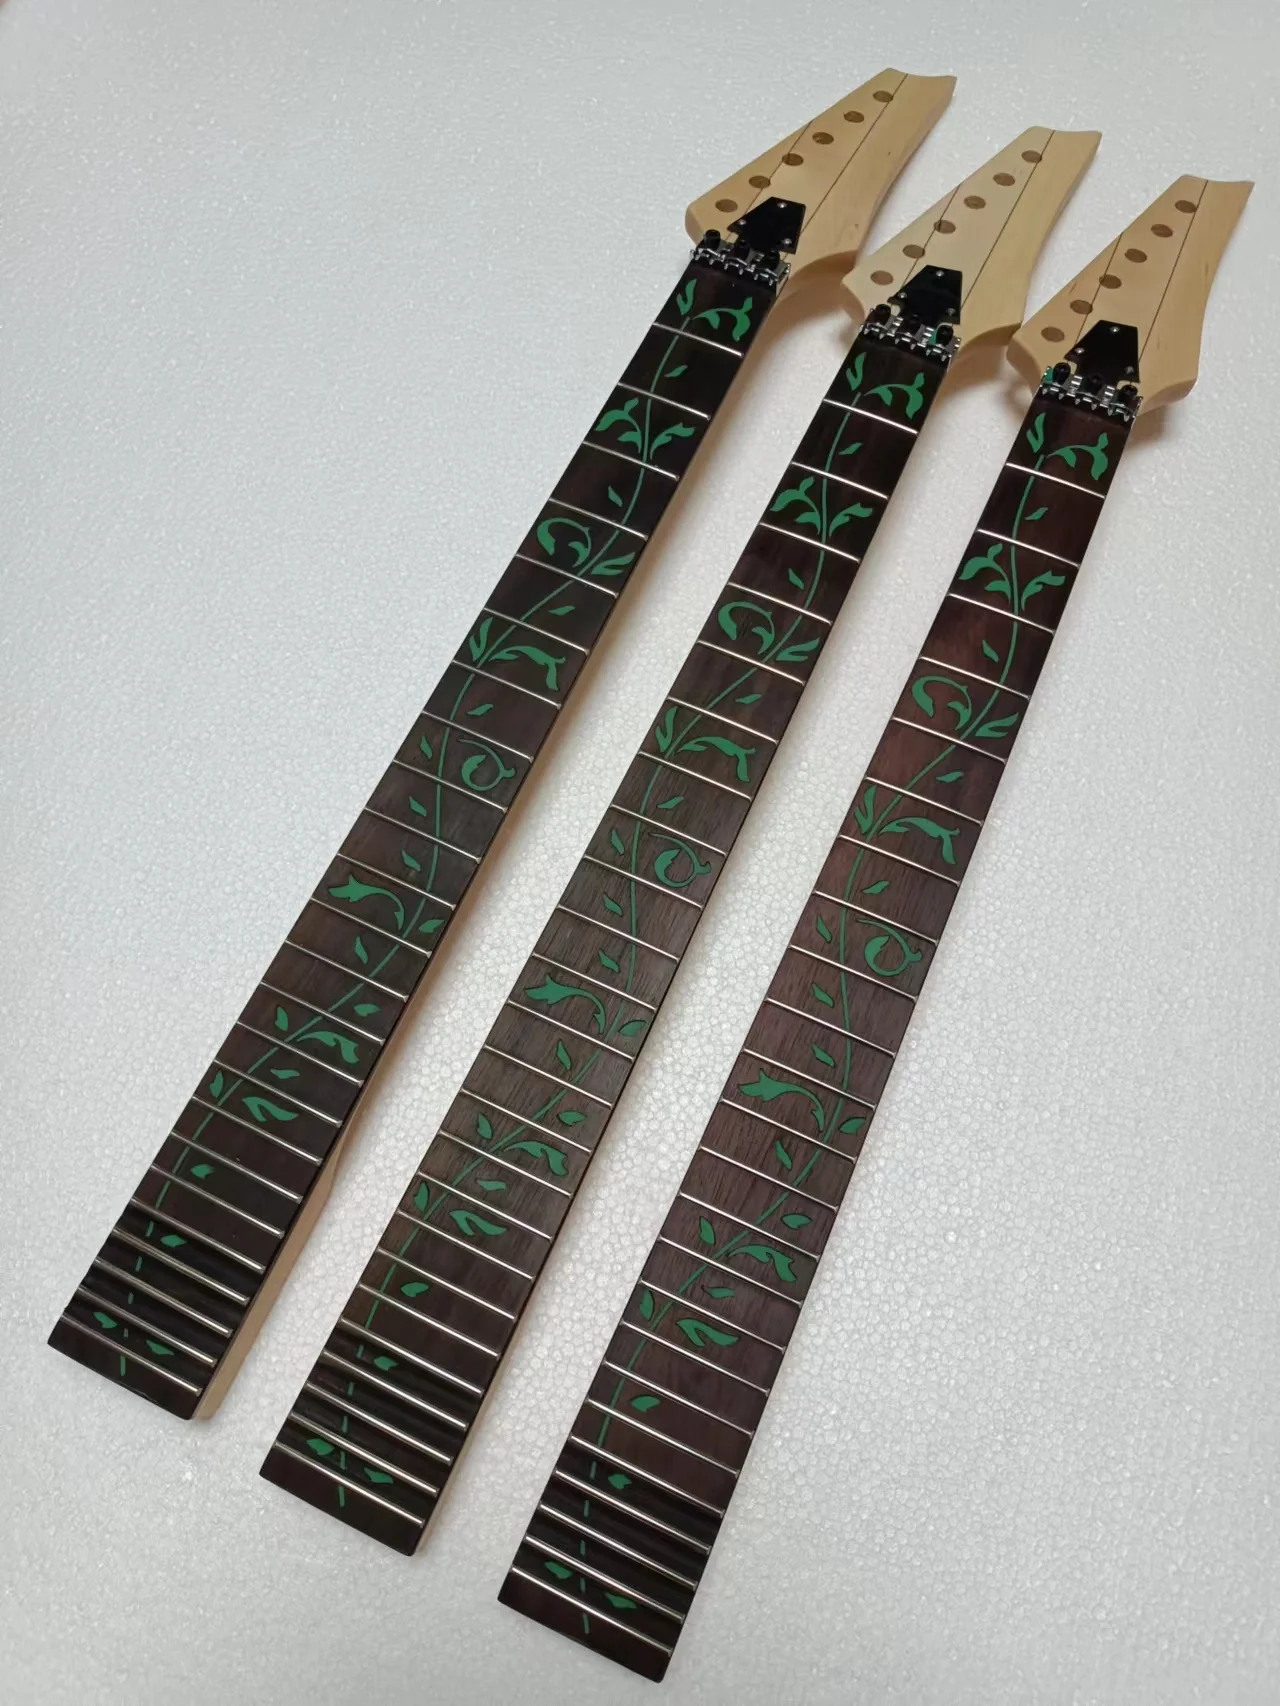 24-Fret IB Style Electric Guitar Neck Glazed Green Tree Of Life Inlay Fingerboard Fashionable Multiple Layers Maple enlarge